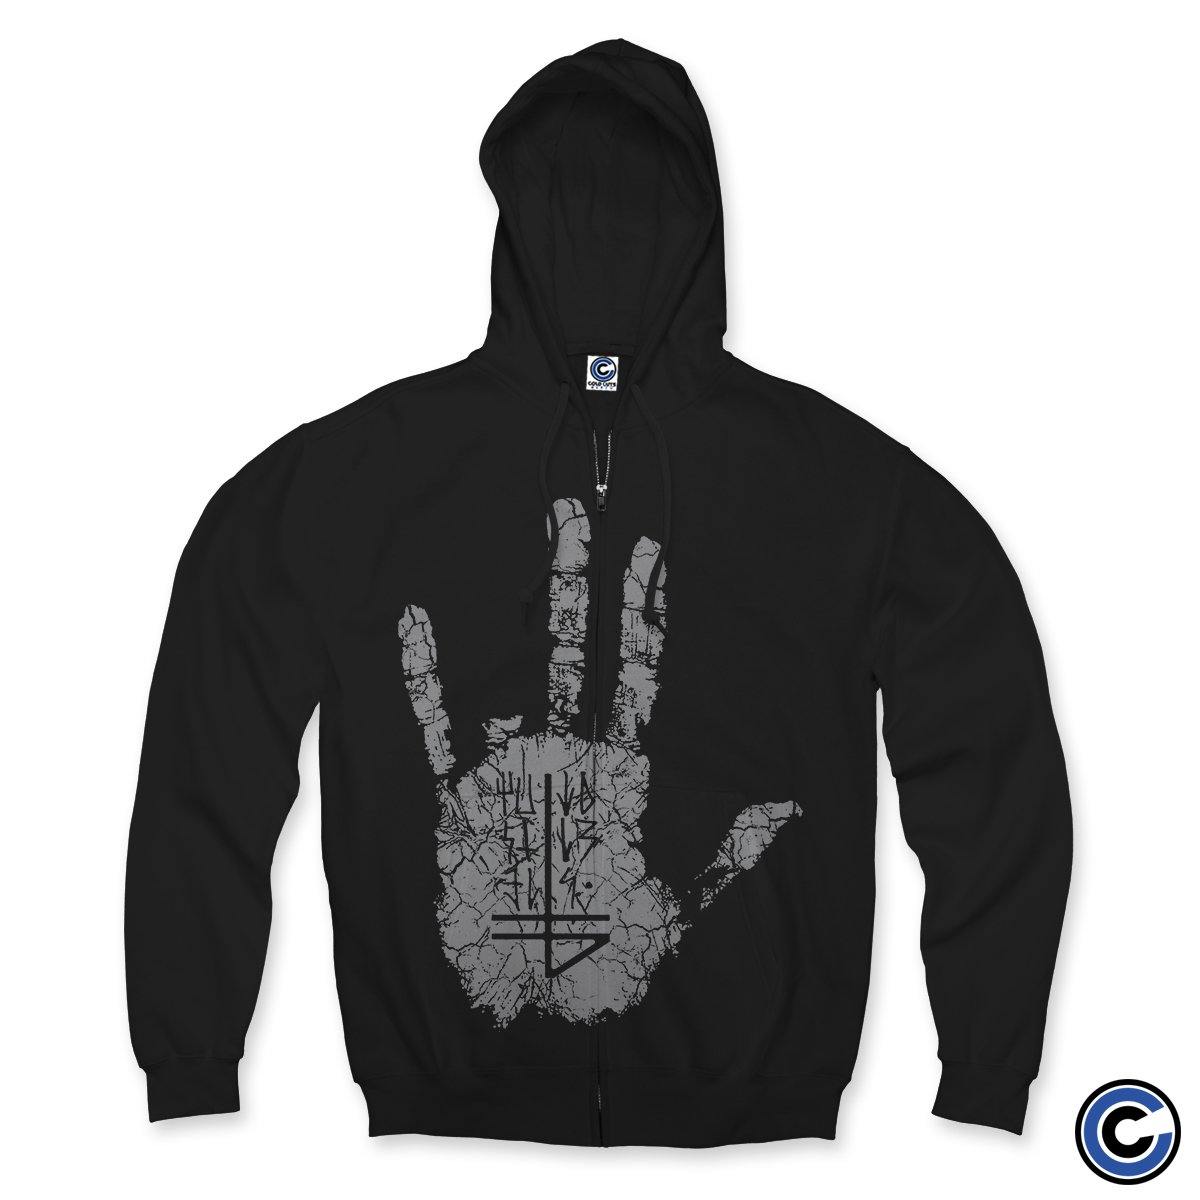 Buy – The Banner "Hand" Zip Up Hoodie – Band & Music Merch – Cold Cuts Merch